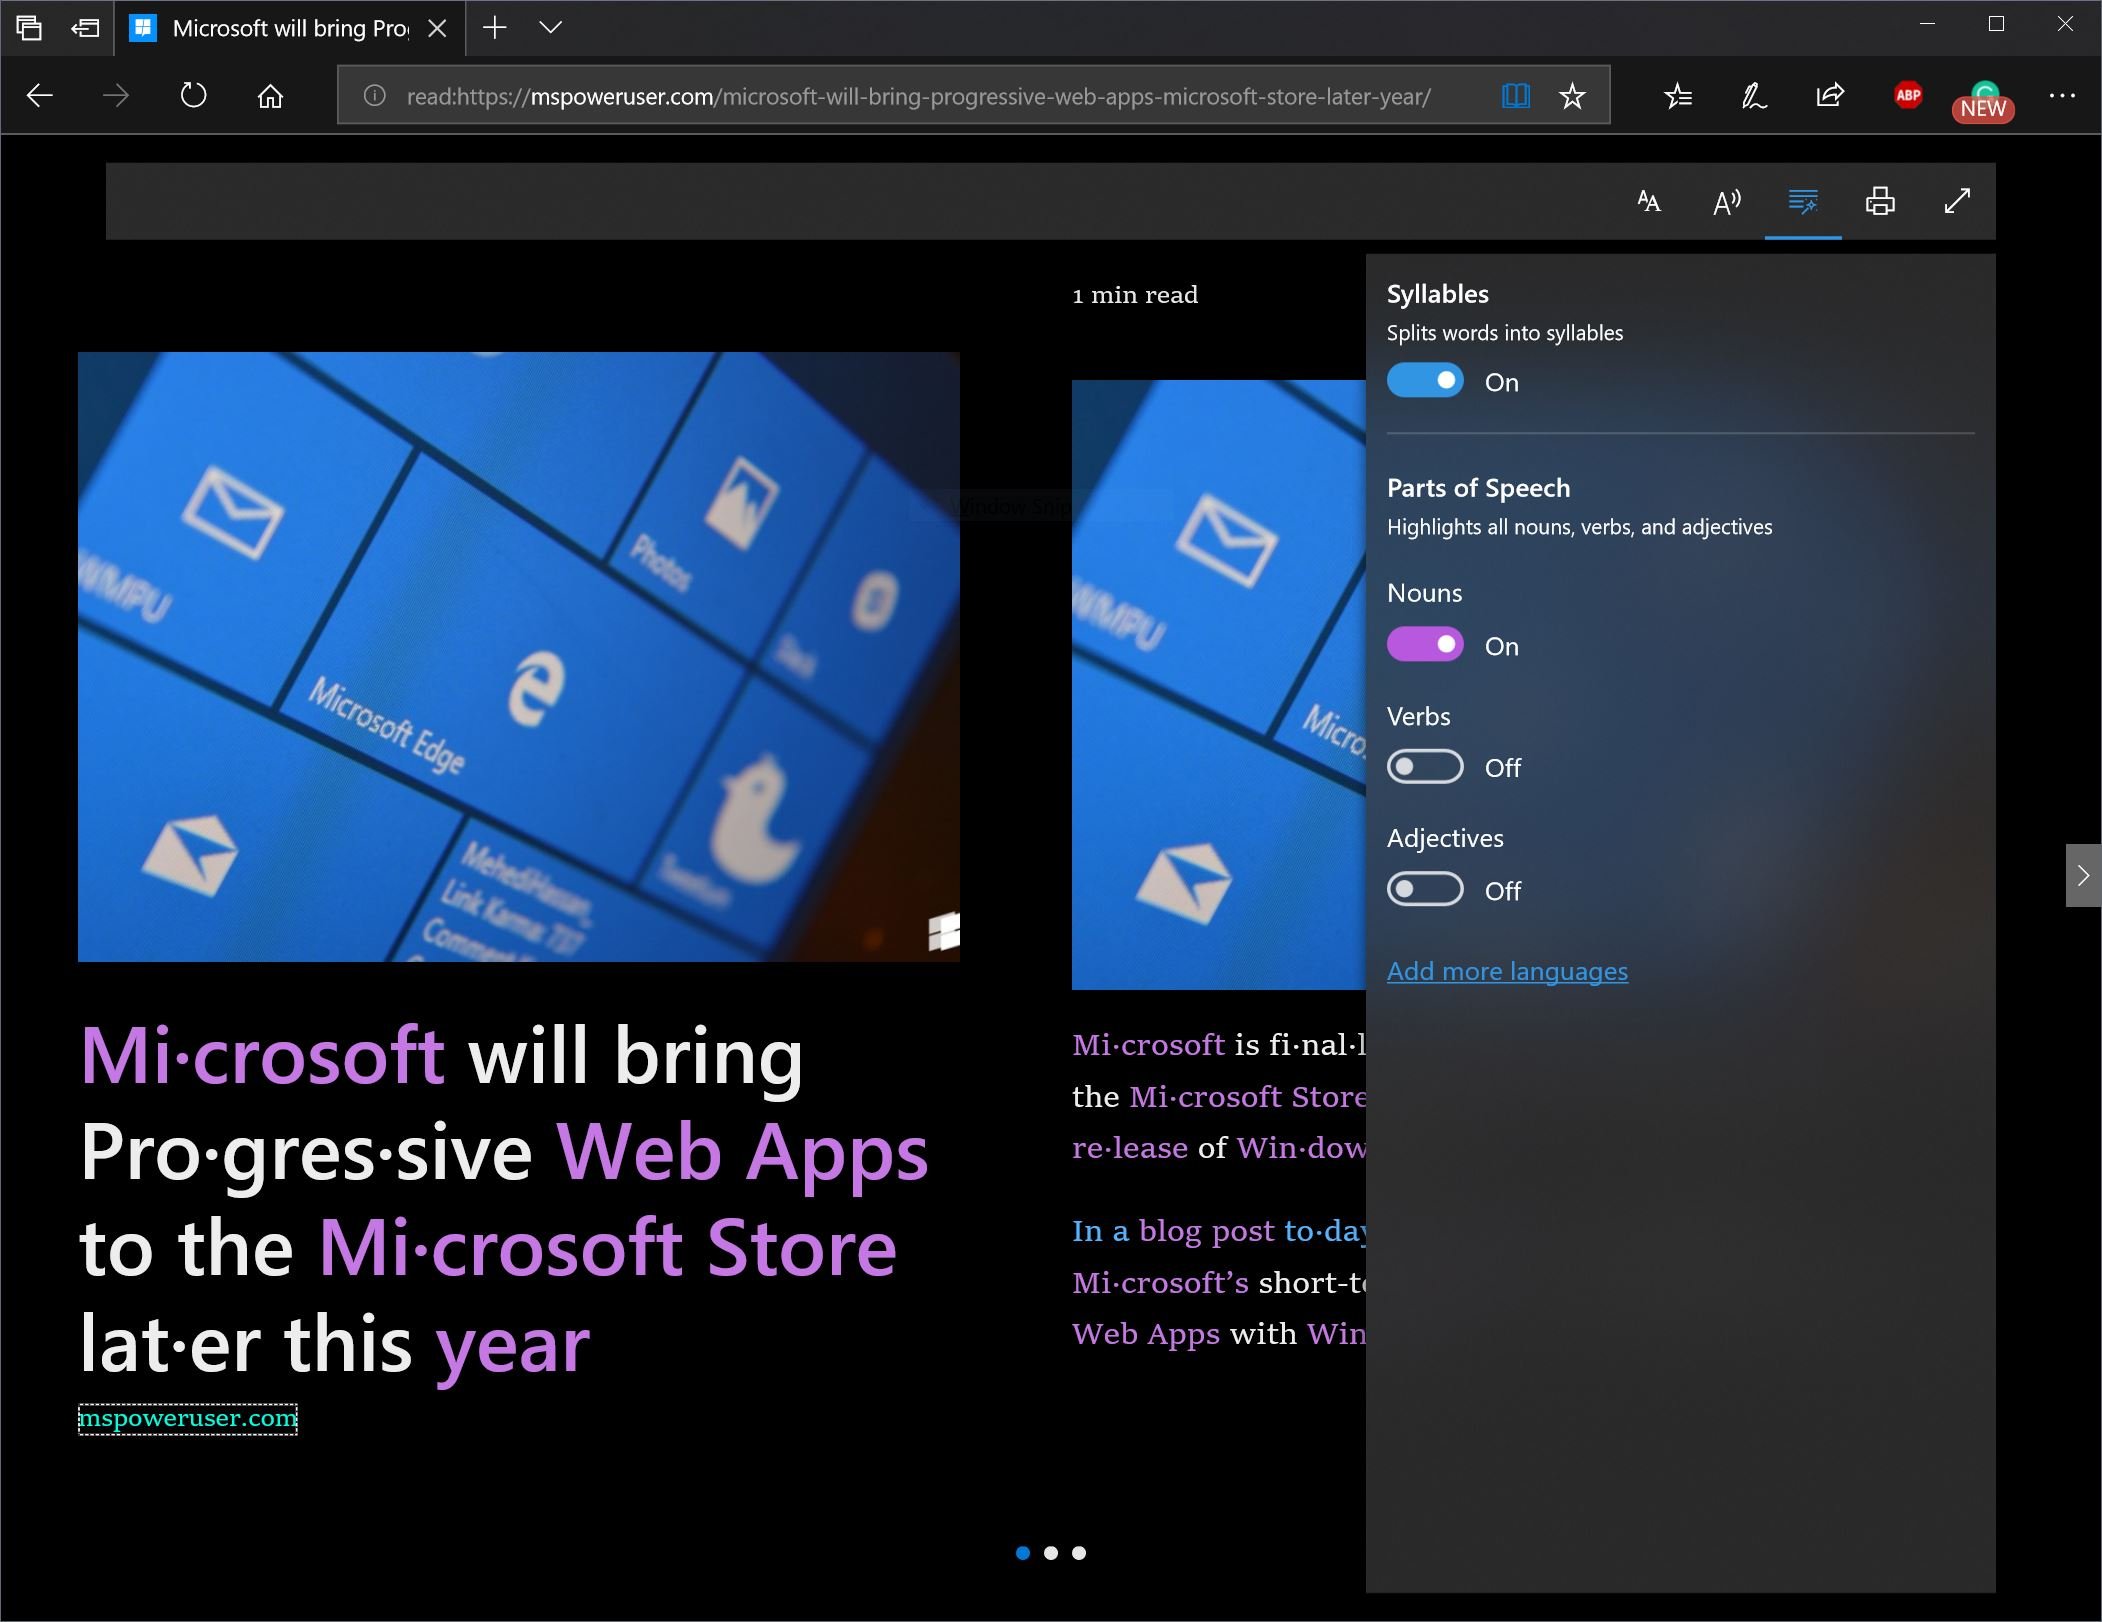 Microsoft Edge browser to get much improved Settings page in next build